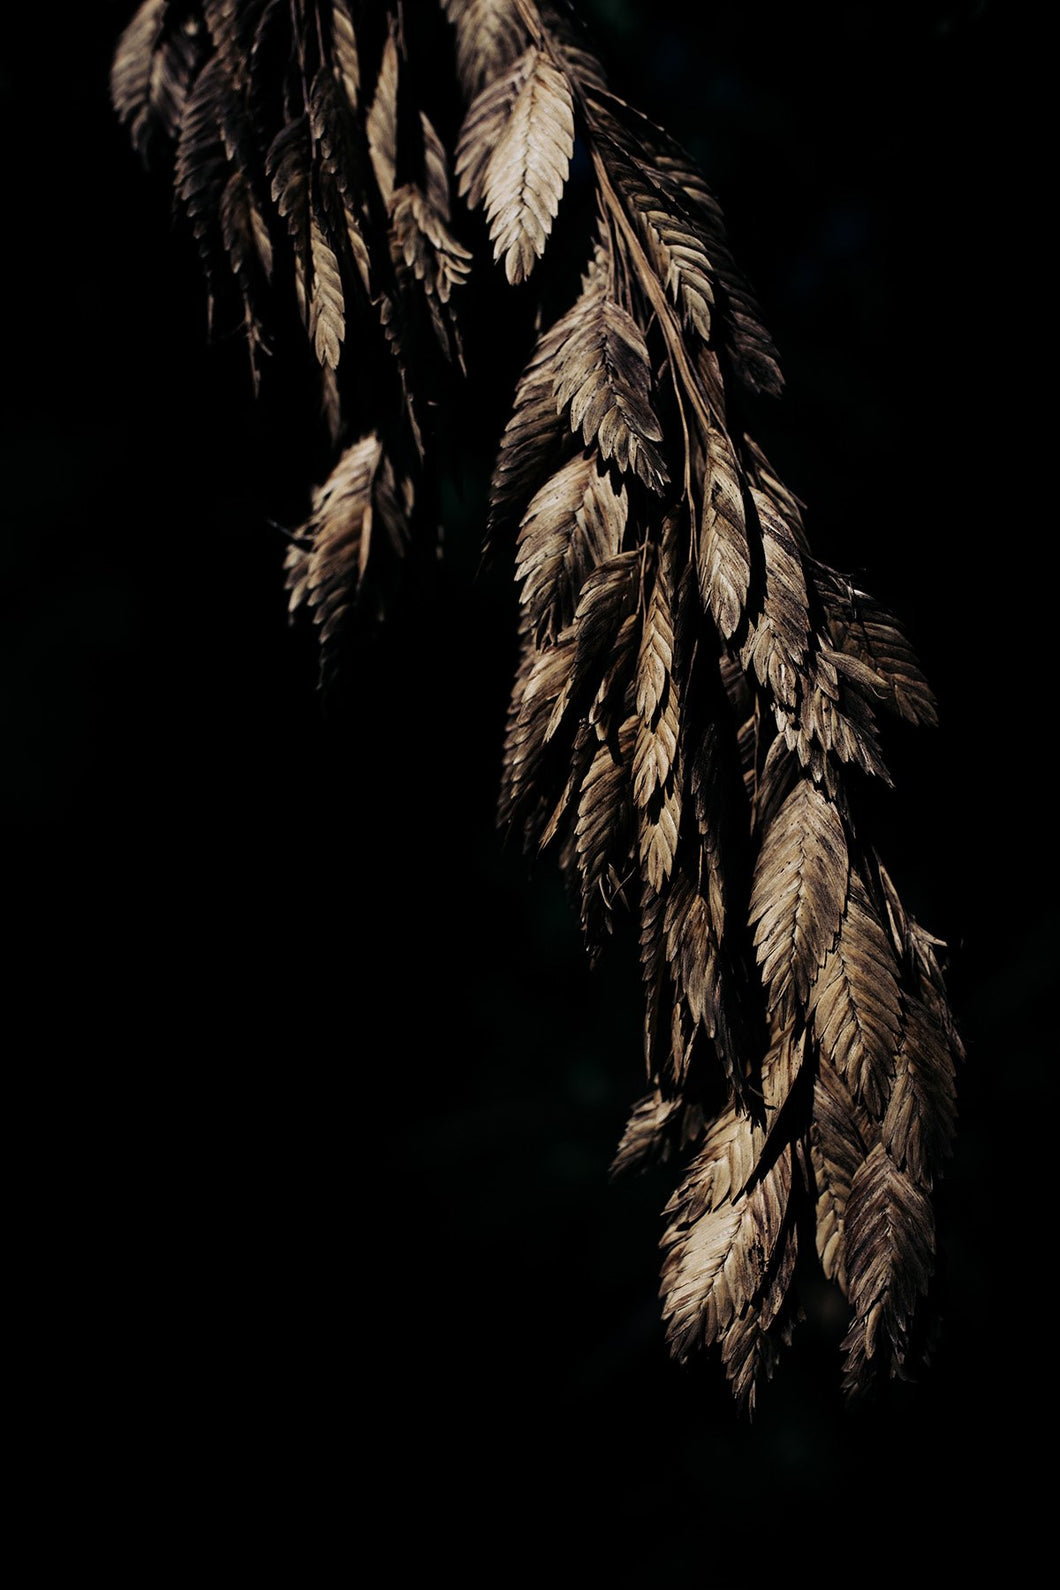 Art Photography-Feathery Fronds

This piece of art photography titled 